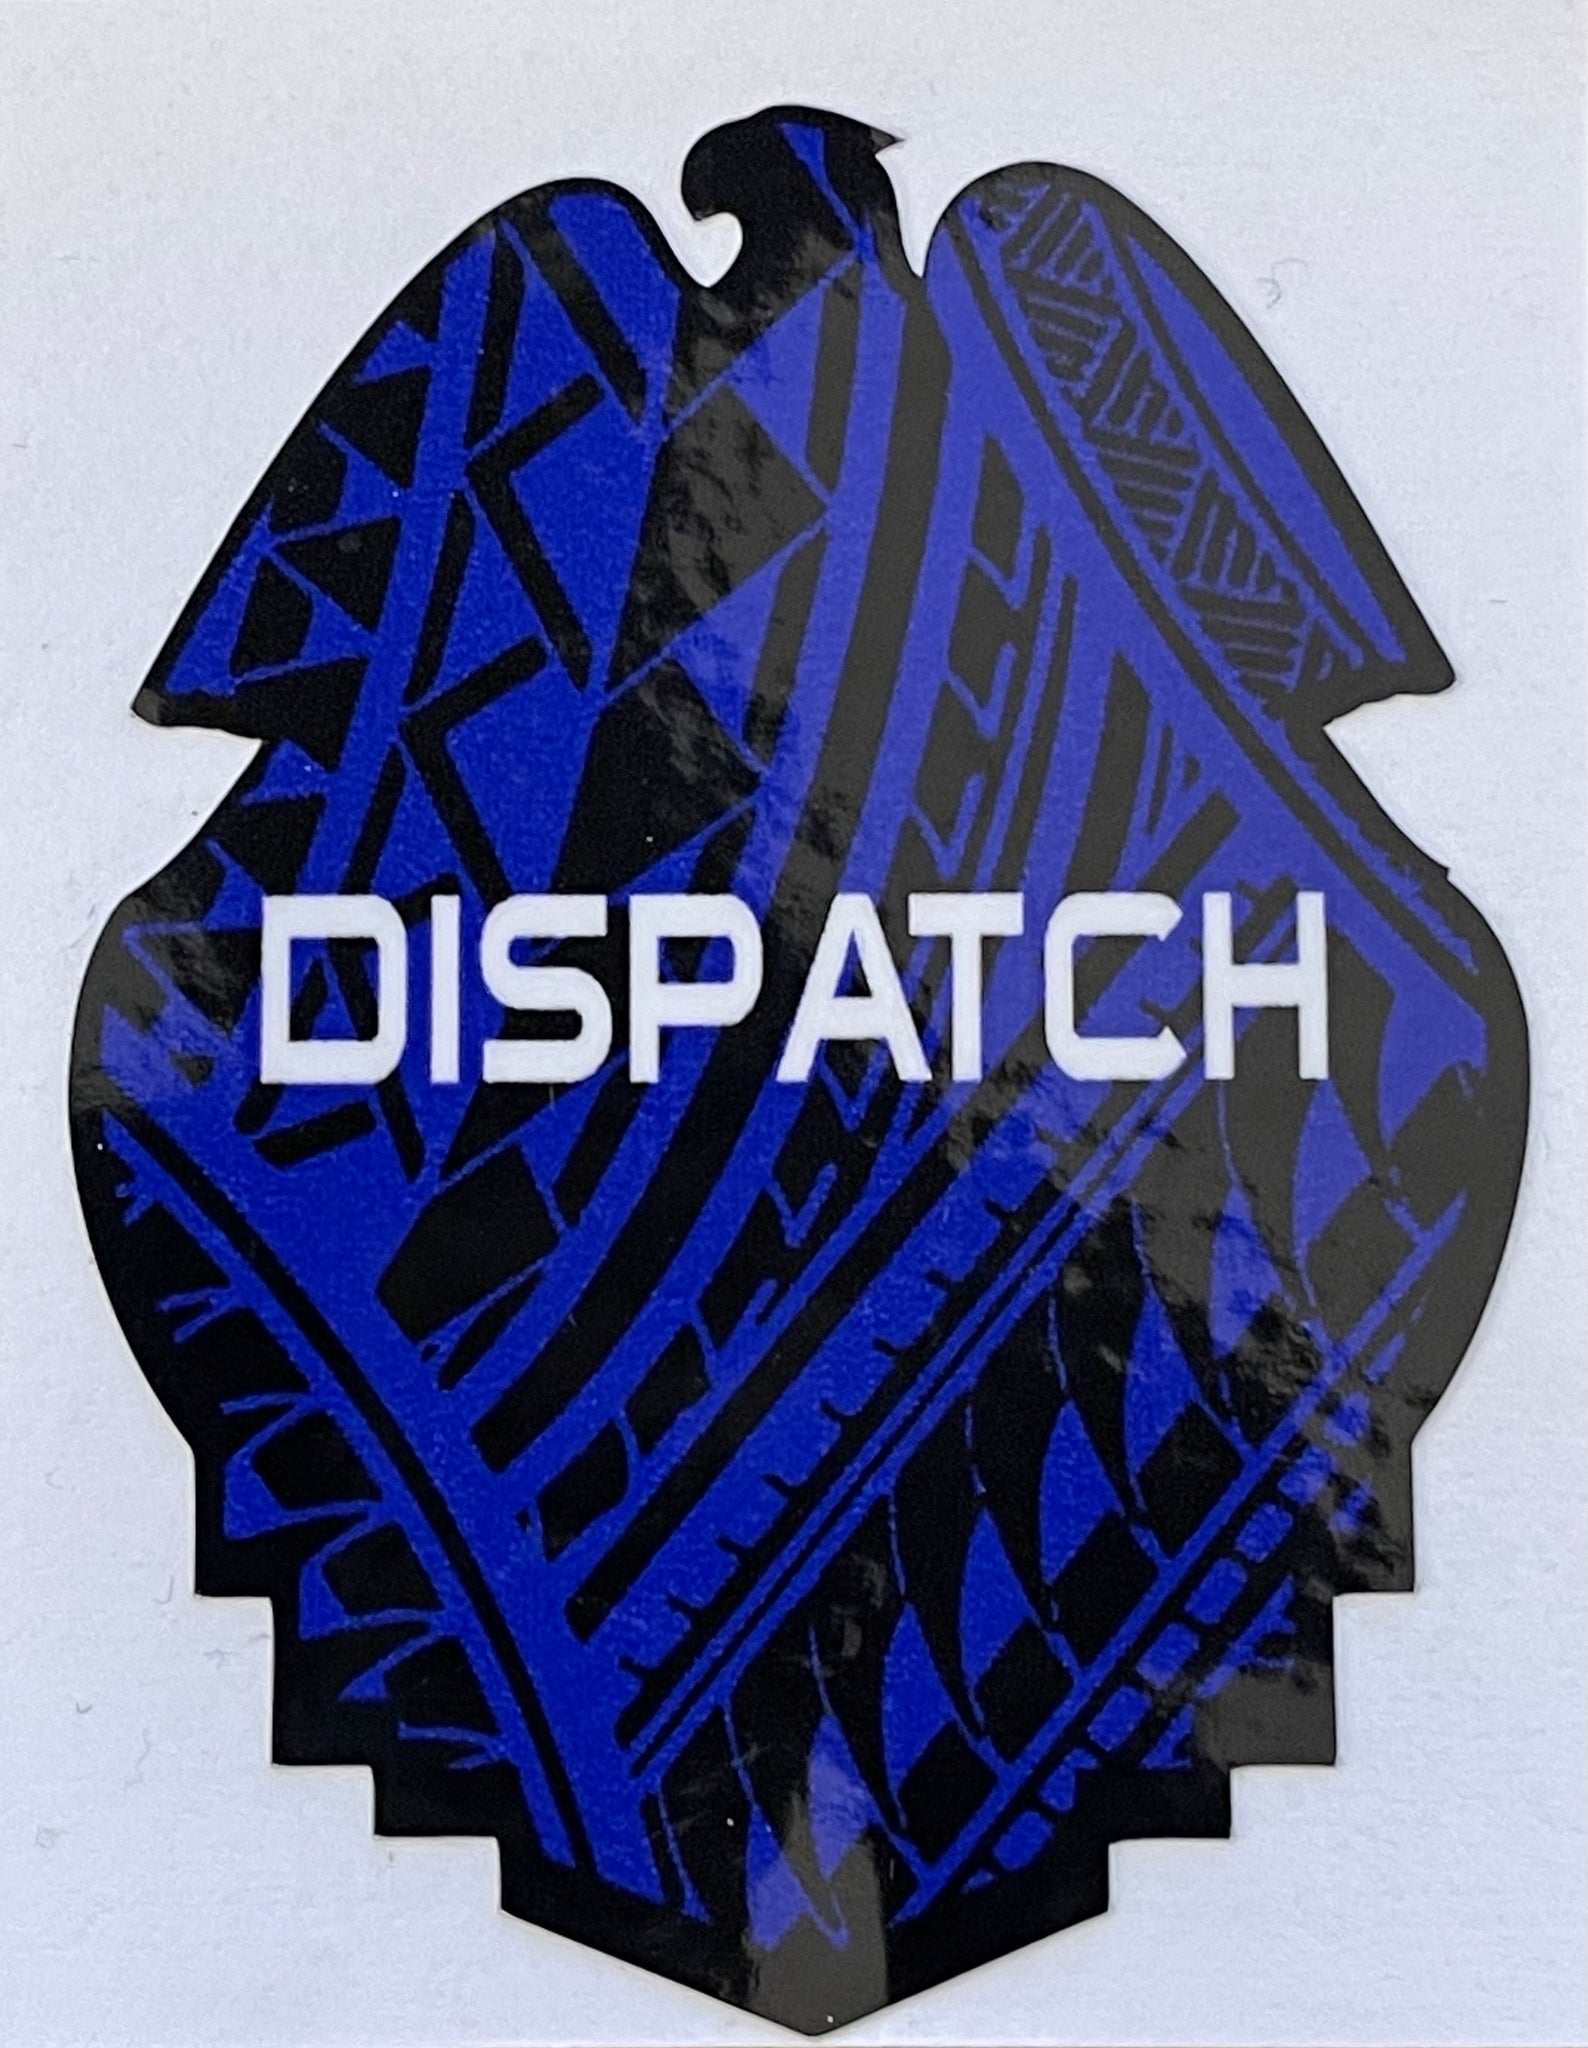 Dispatch Full Tribal Badge Sticker Decal